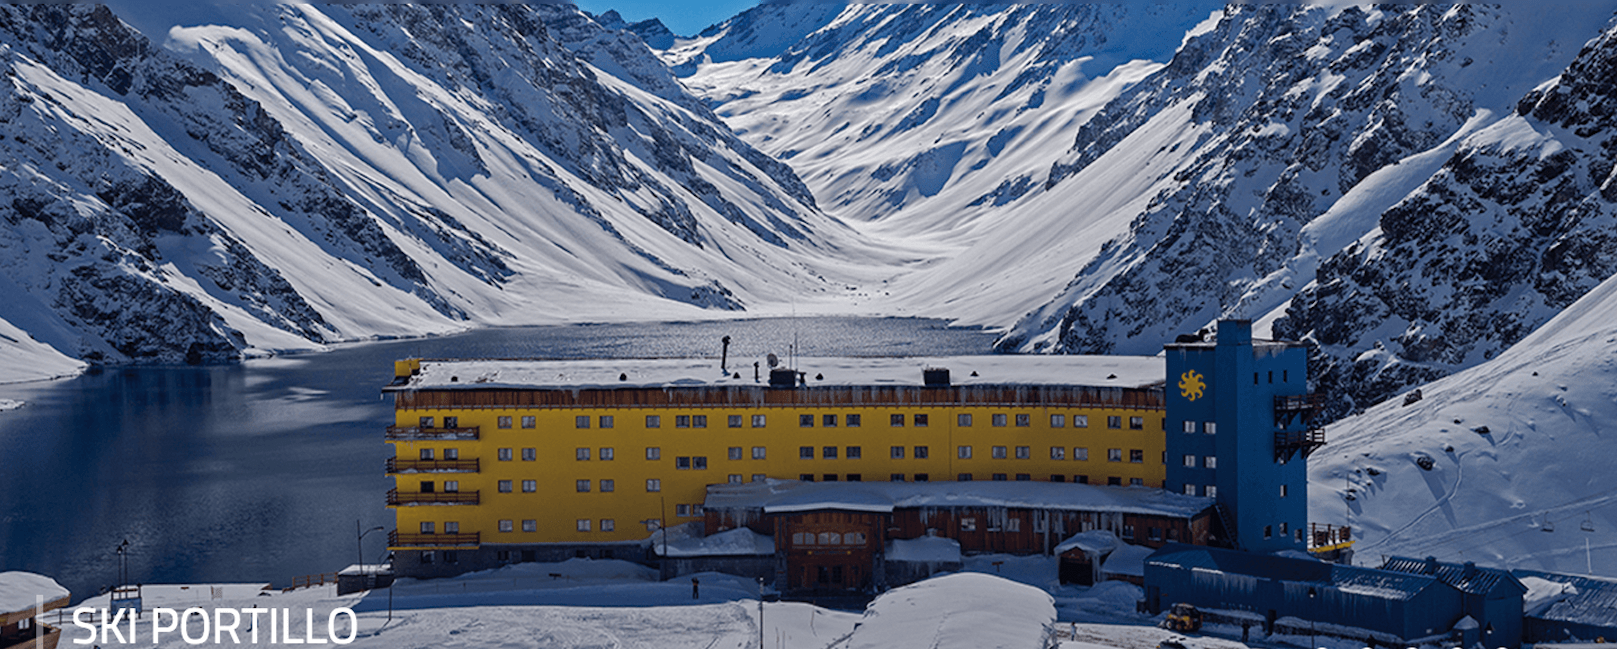 The infamous 'Cruise Ship' hotel in Portillo, Chile. 